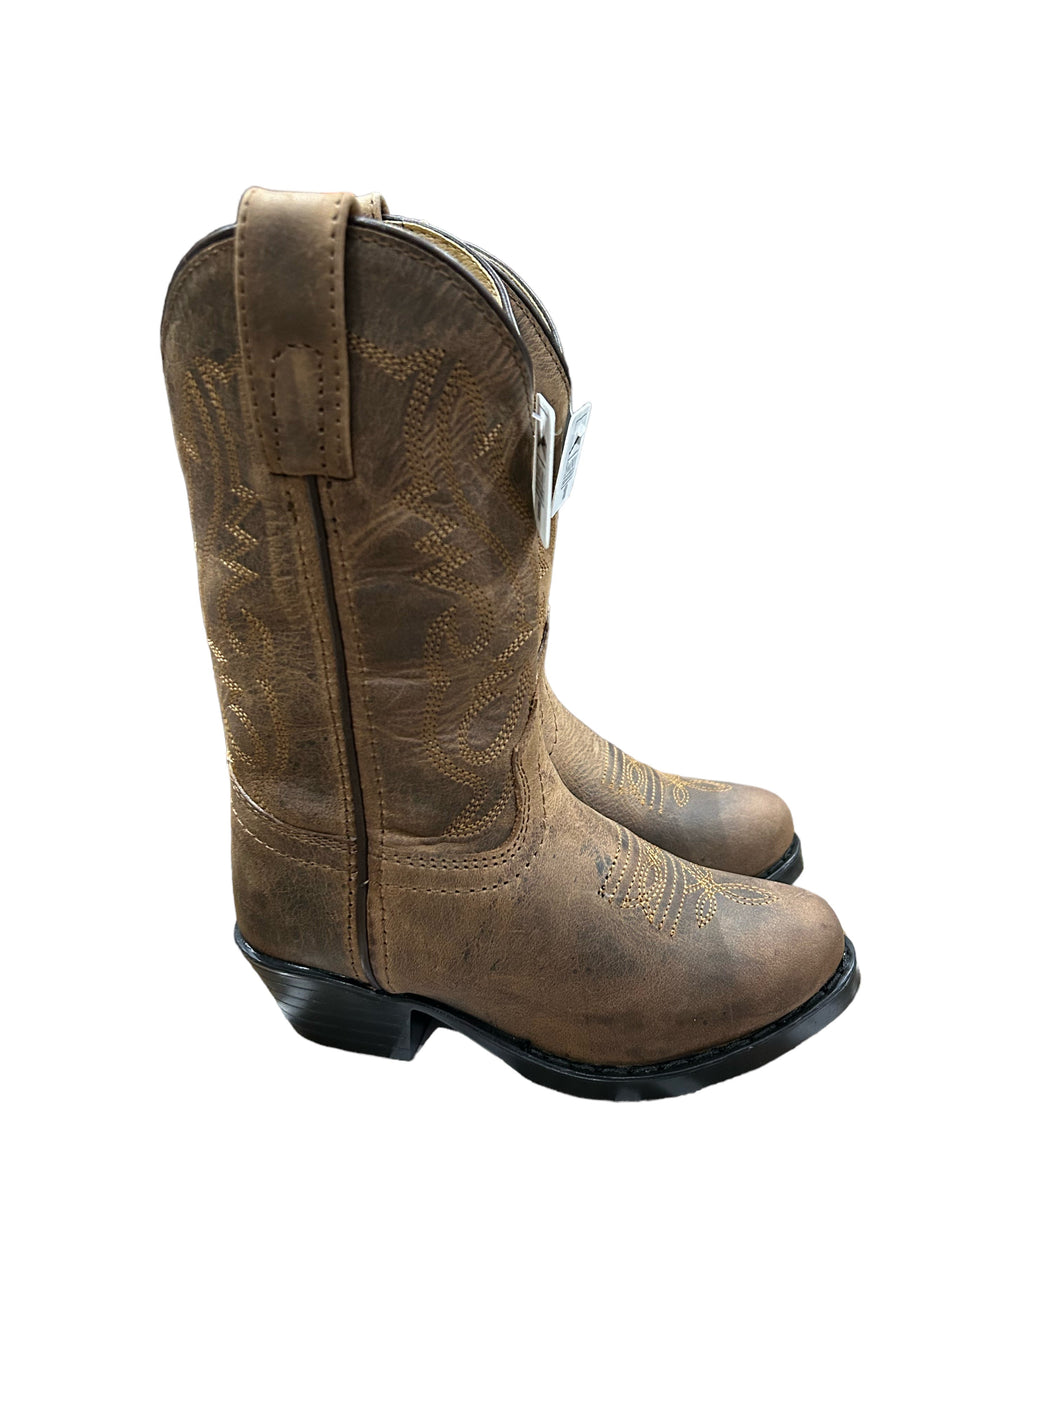 Smoky Mountain Boots 3034Y Denver Brown Western Youth Boots